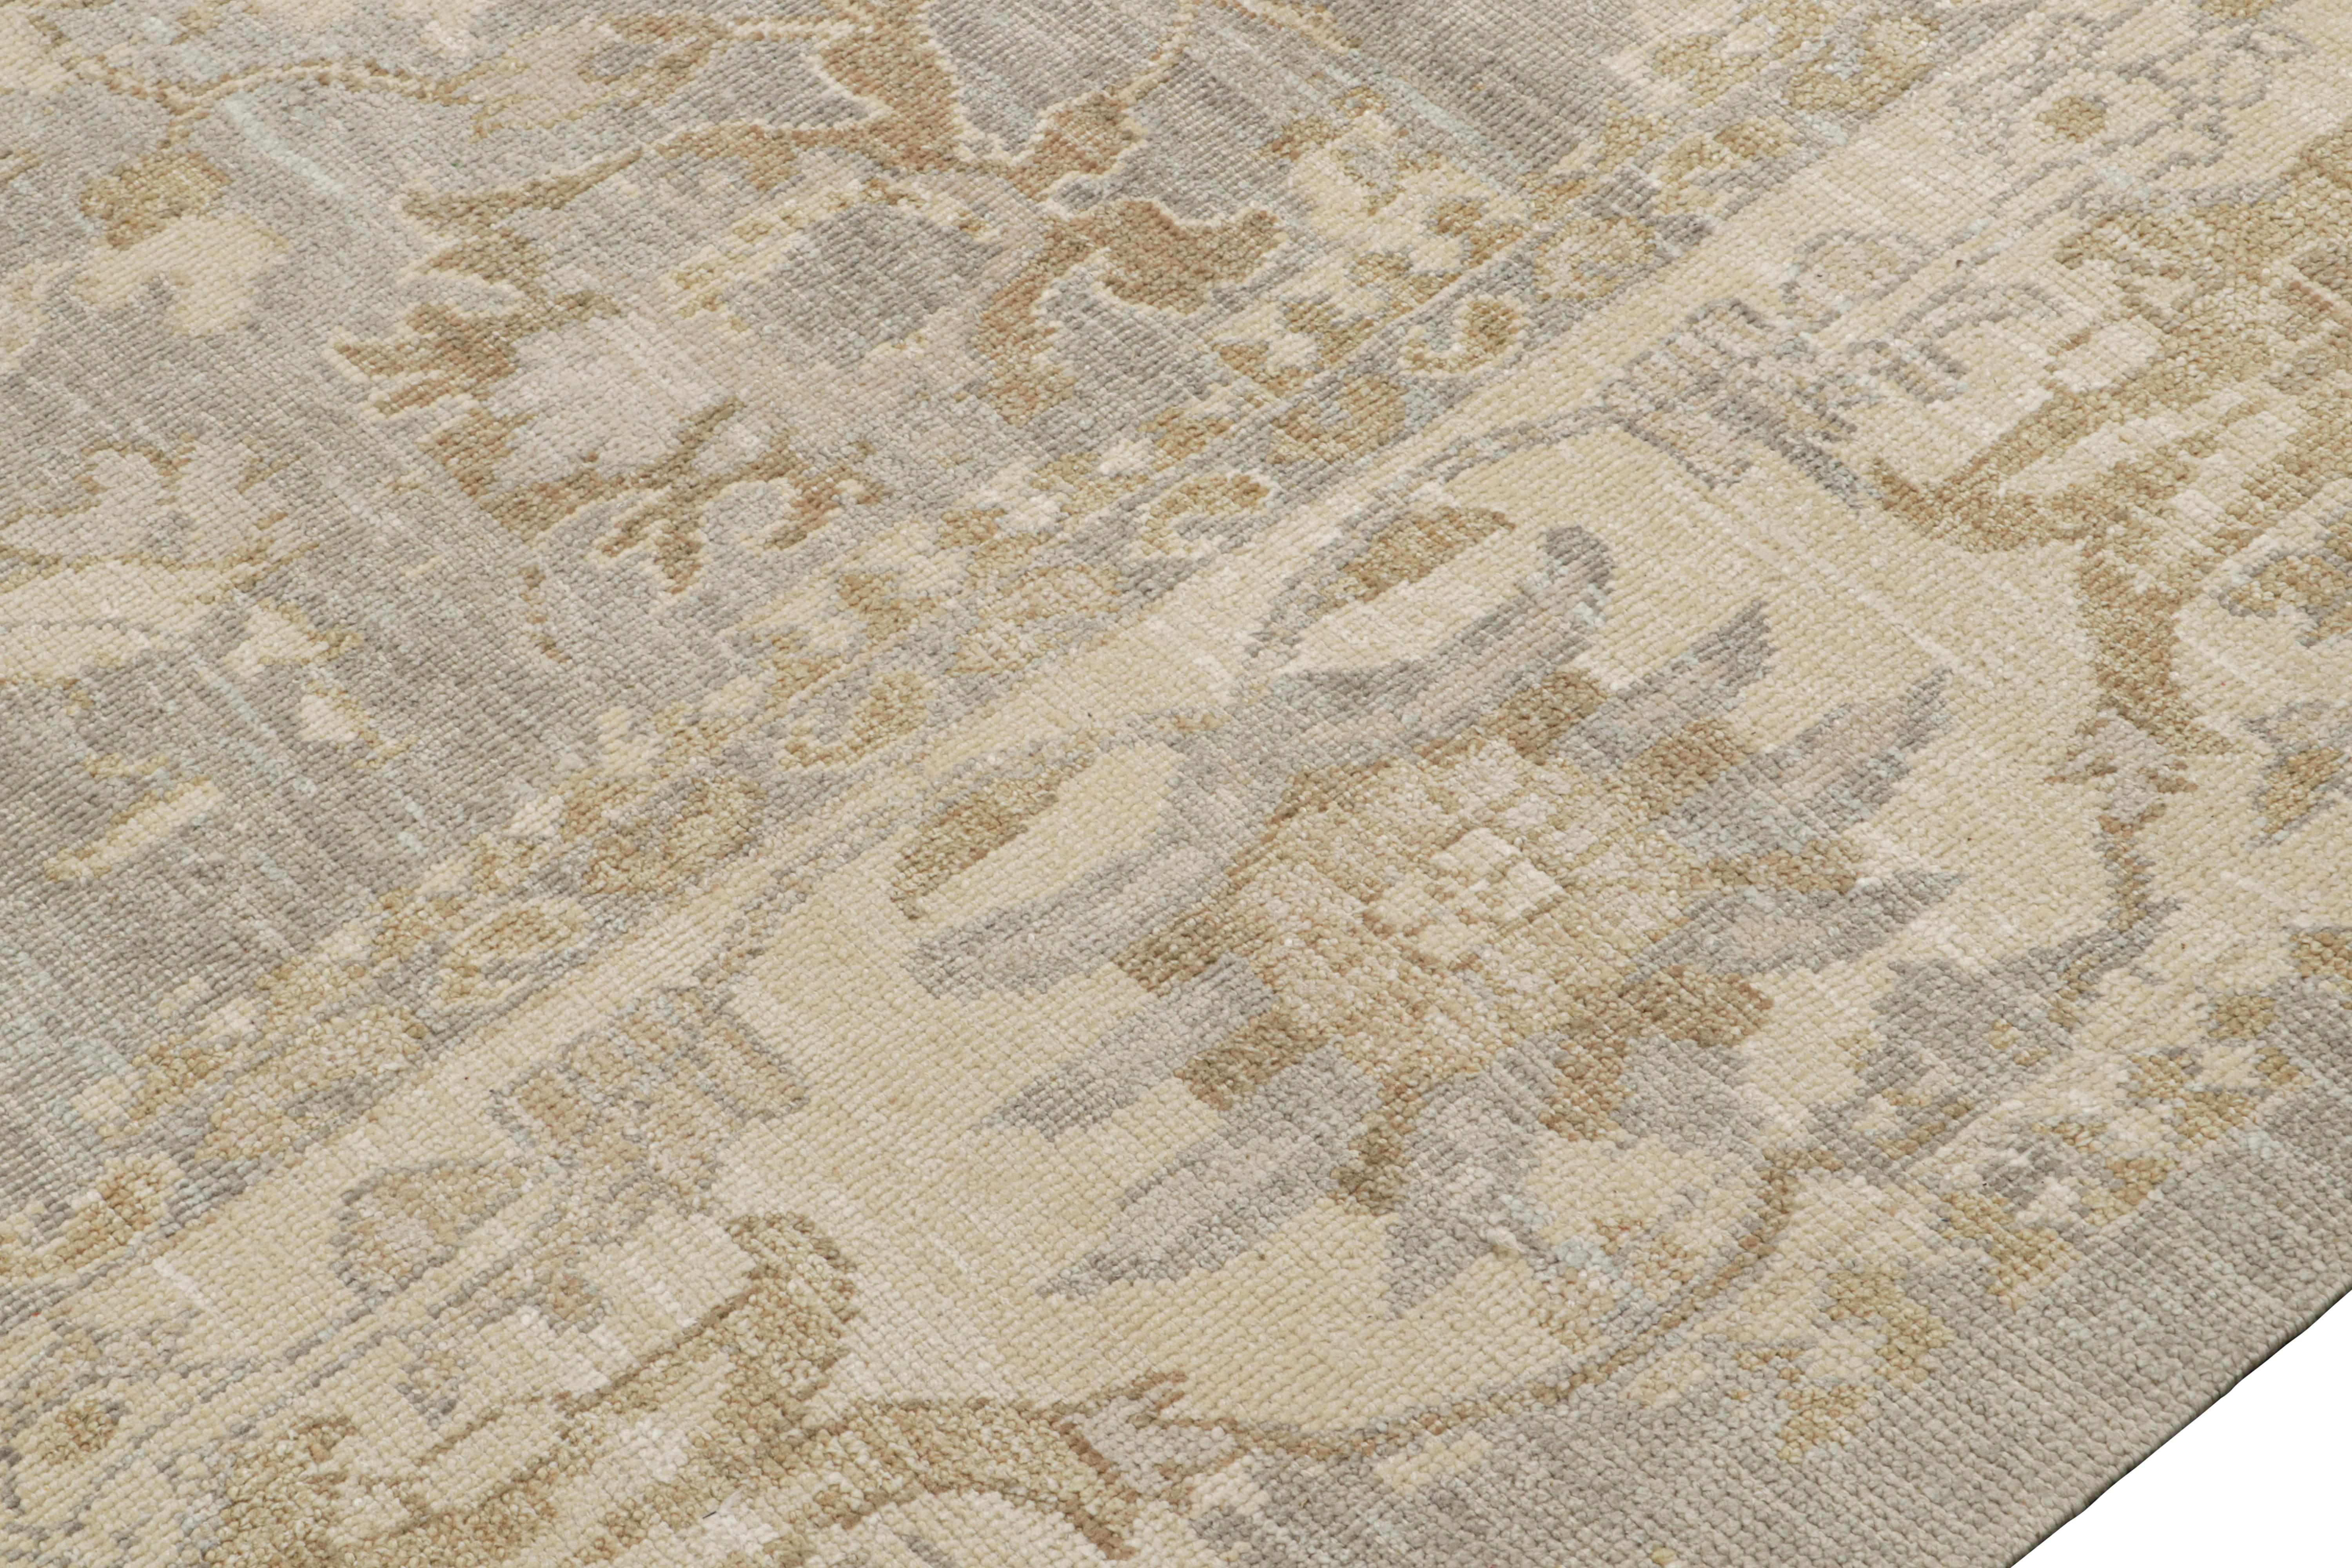 Rug & Kilim’s Oushak style rug in Grey & Beige-Brown Floral Patterns In New Condition For Sale In Long Island City, NY